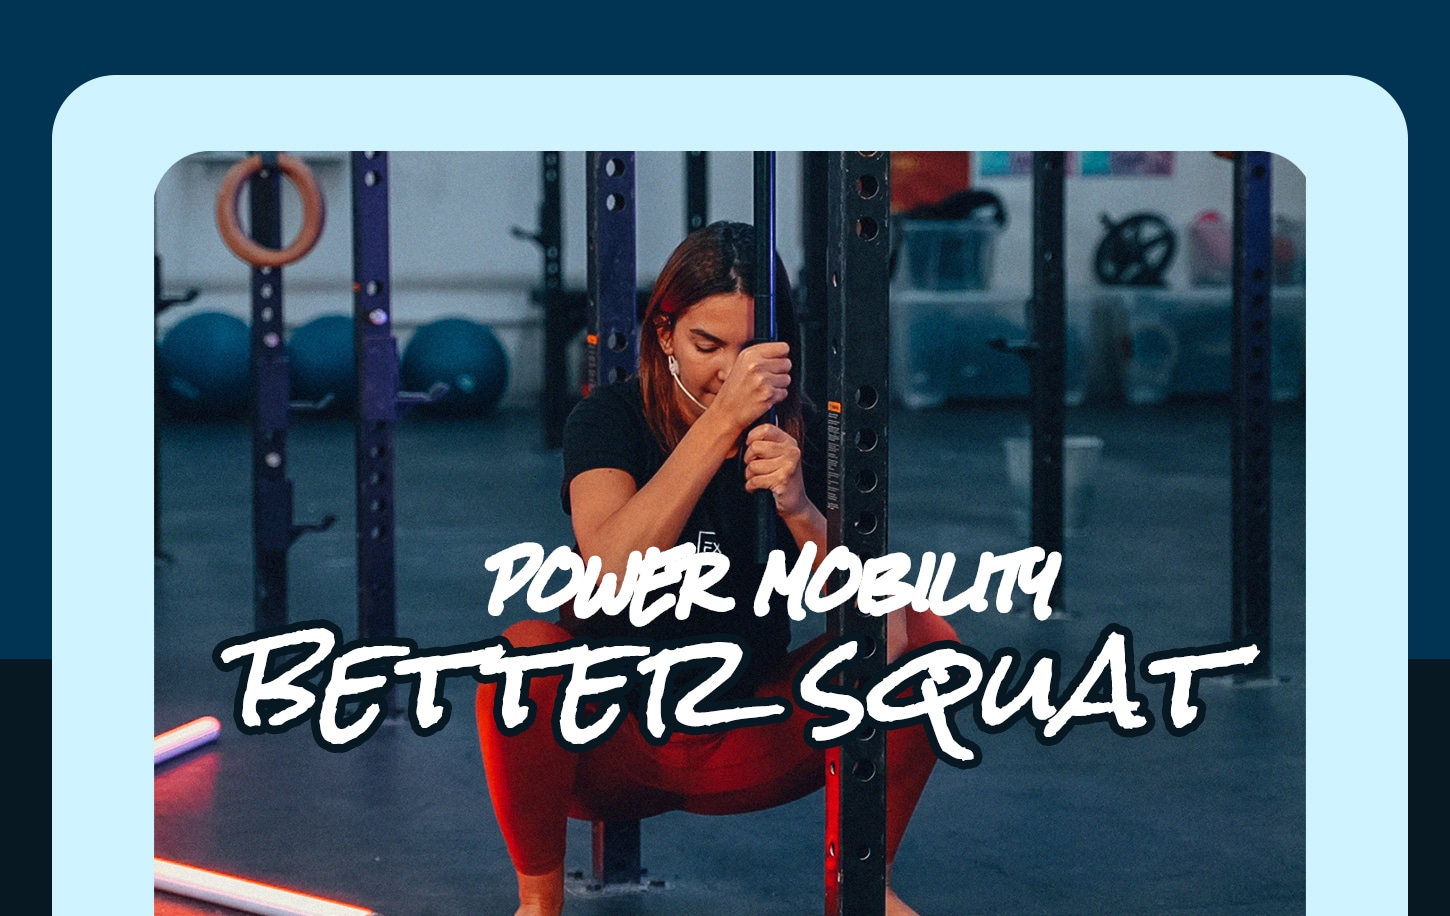 Power Mobility Better Squat by Anthinea Gualtieri